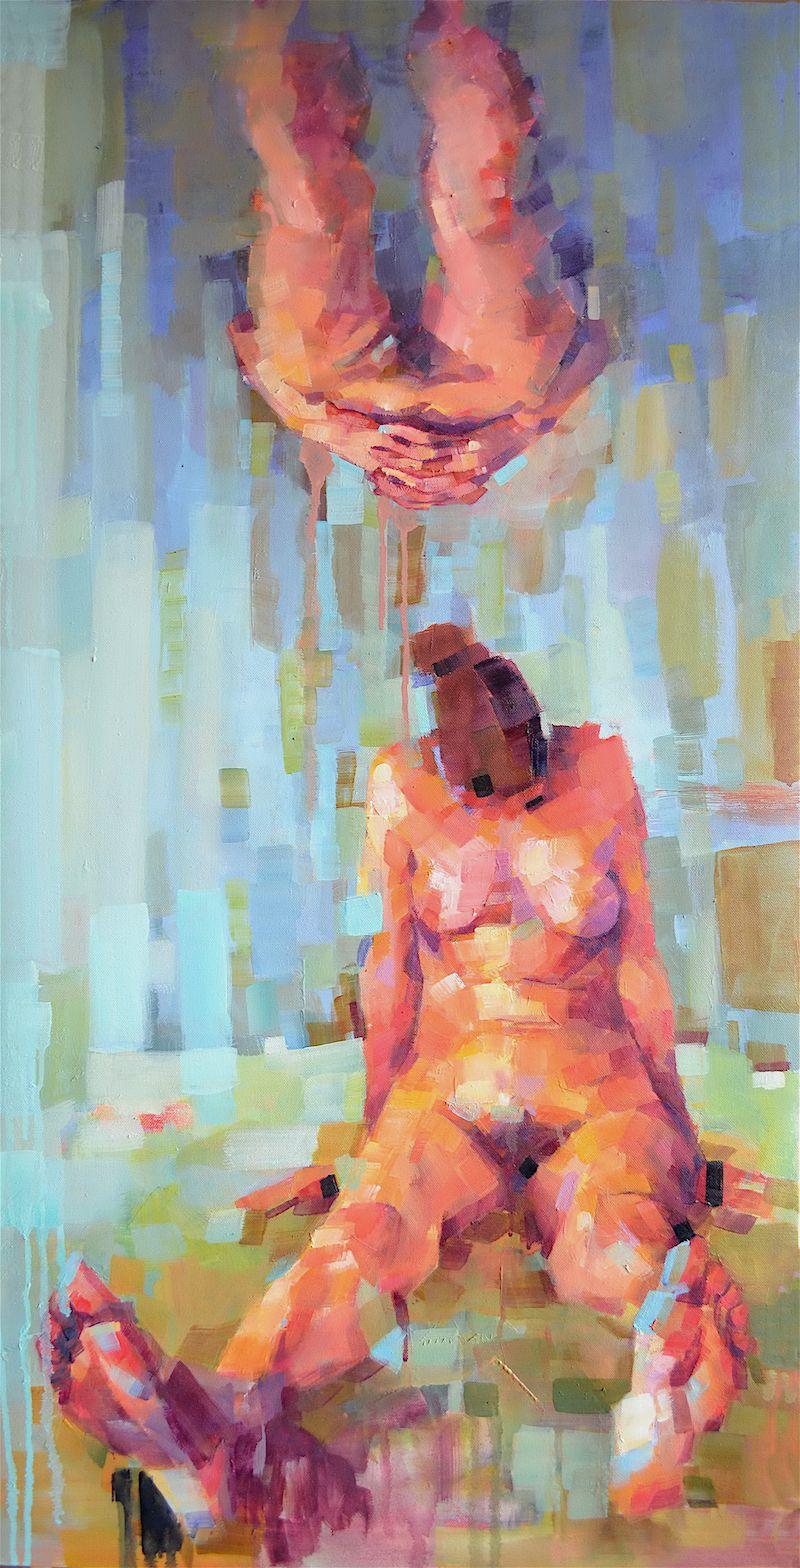 The reflection of gravity, oil on canvas, is focusing on existential issues and on the role of gravity in human life. The top figure in the painting is a 'reflection' of the bottom figure, and while the bottom one is sitting, the top figure is